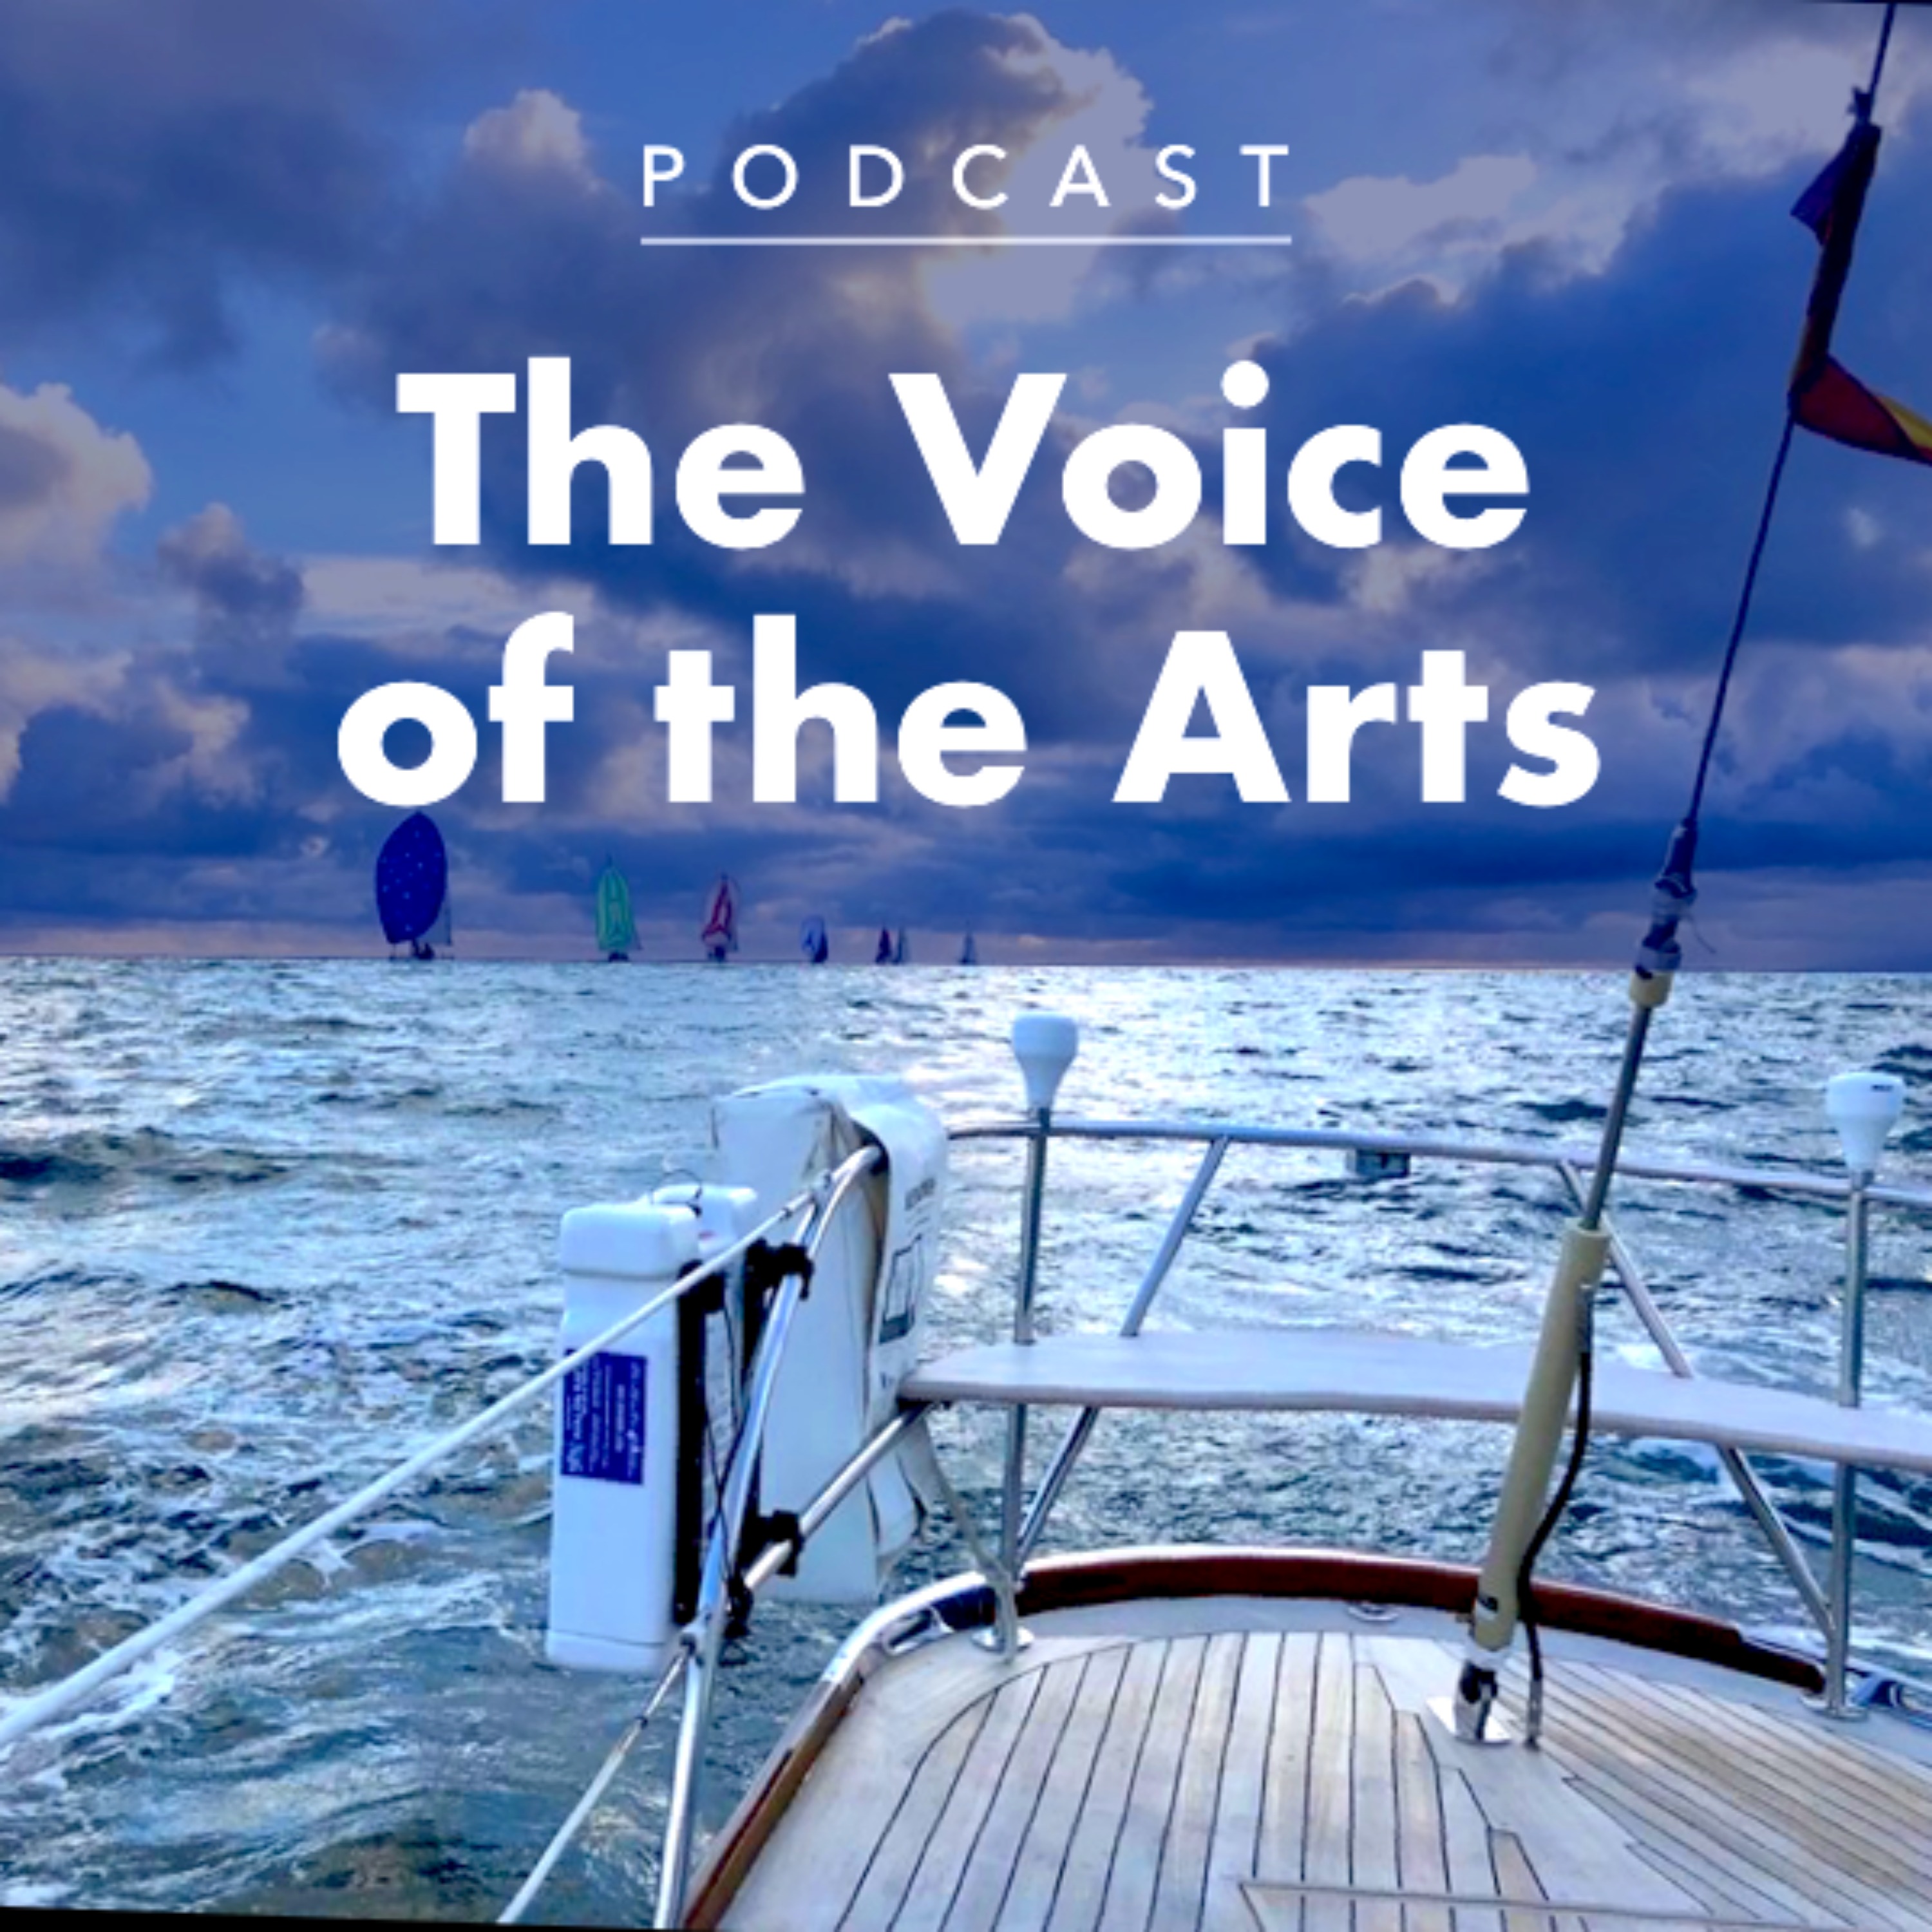 The Voice of the Arts